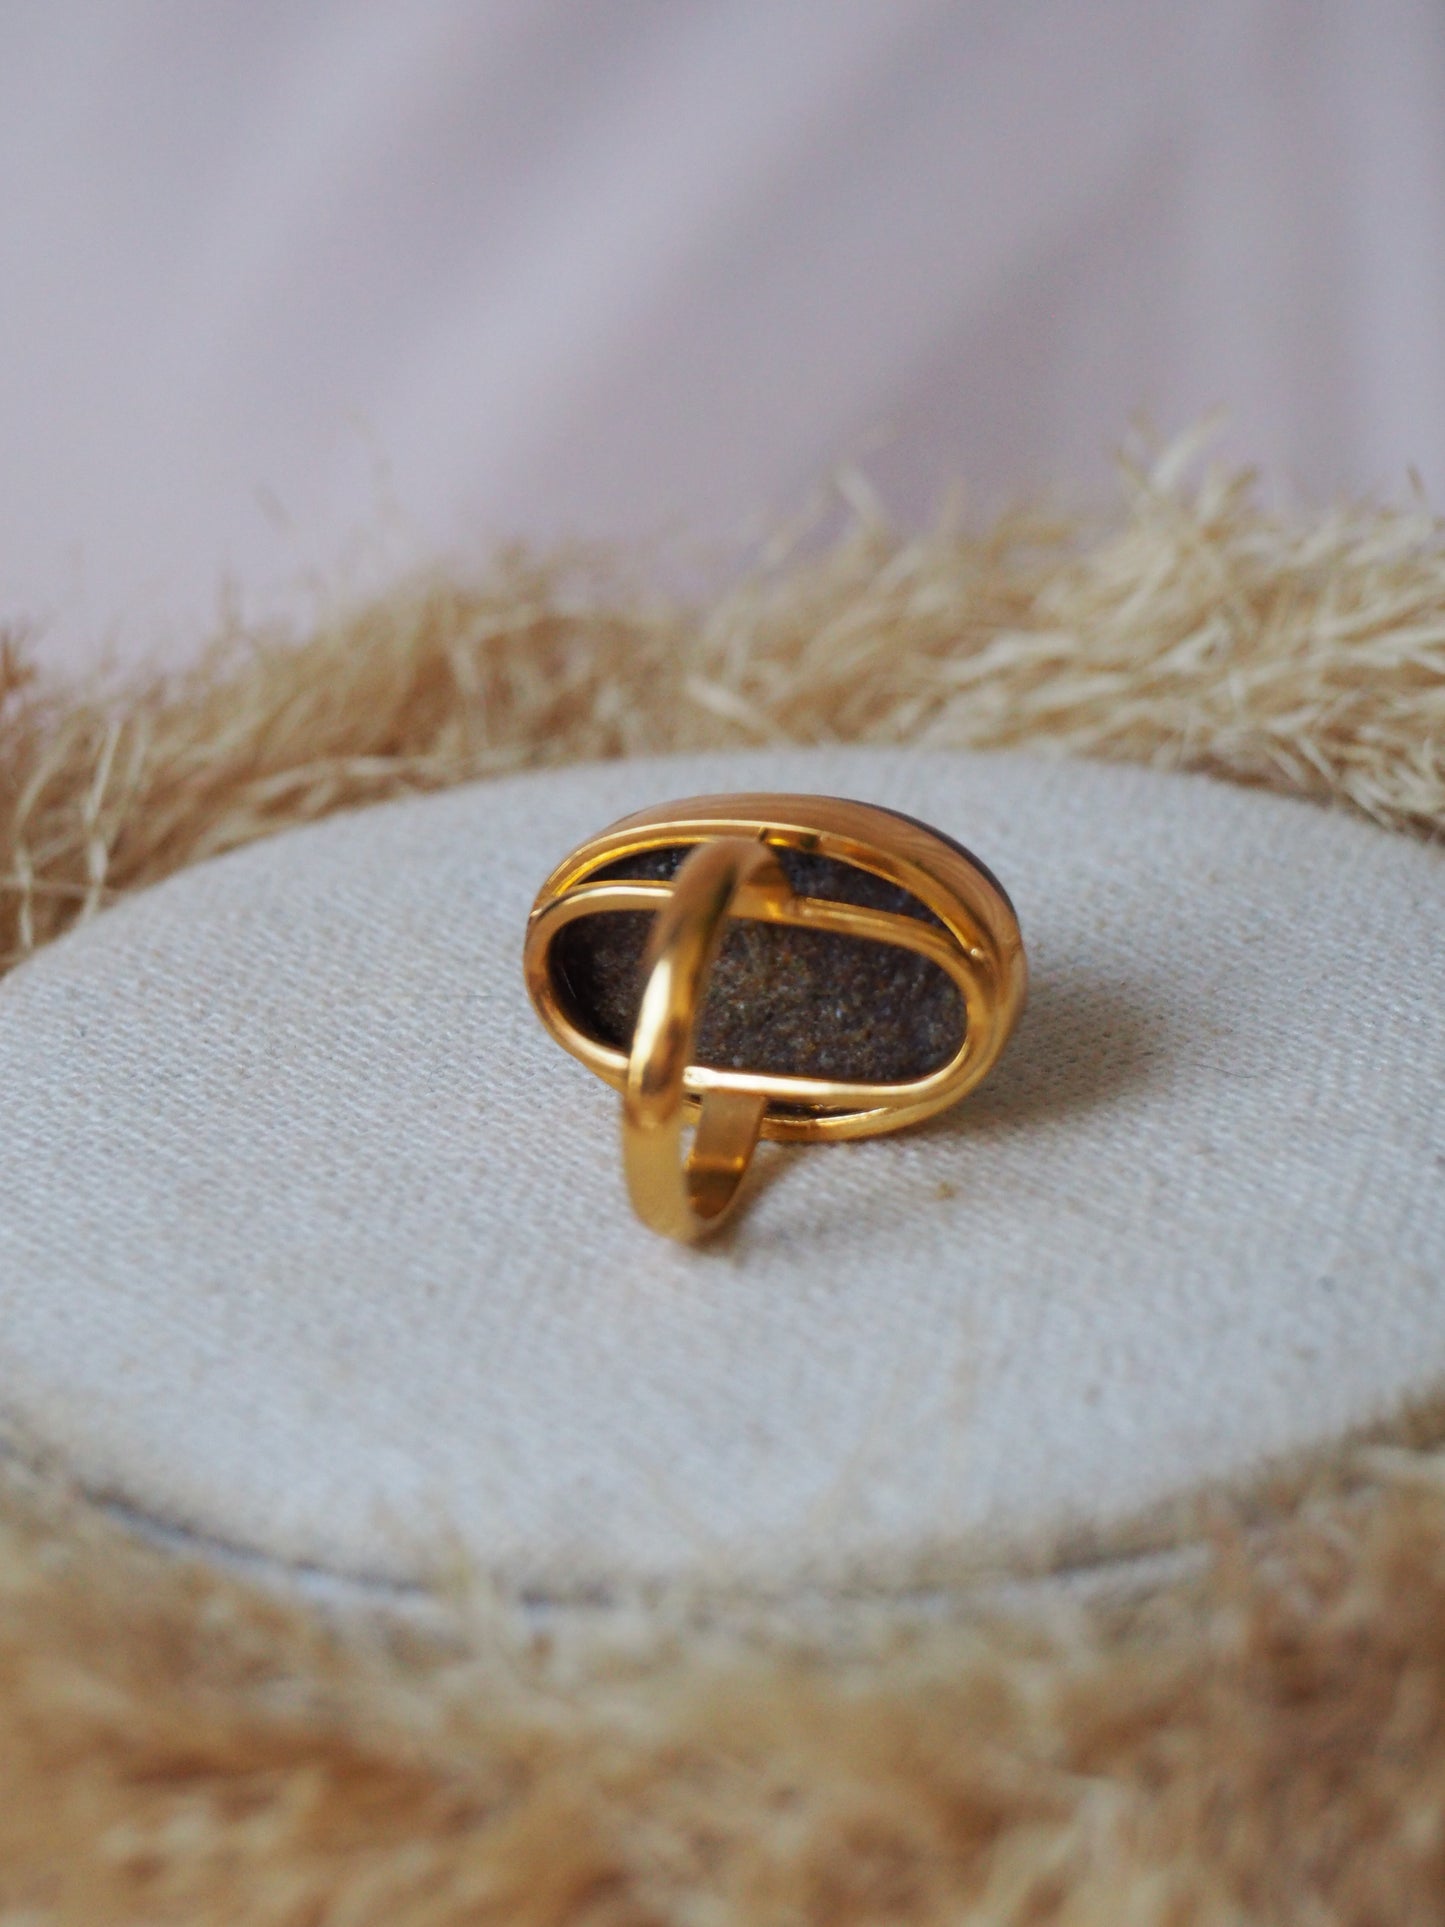 Blue Amber Ring with Natural Inclusions in Gold Plated Silver